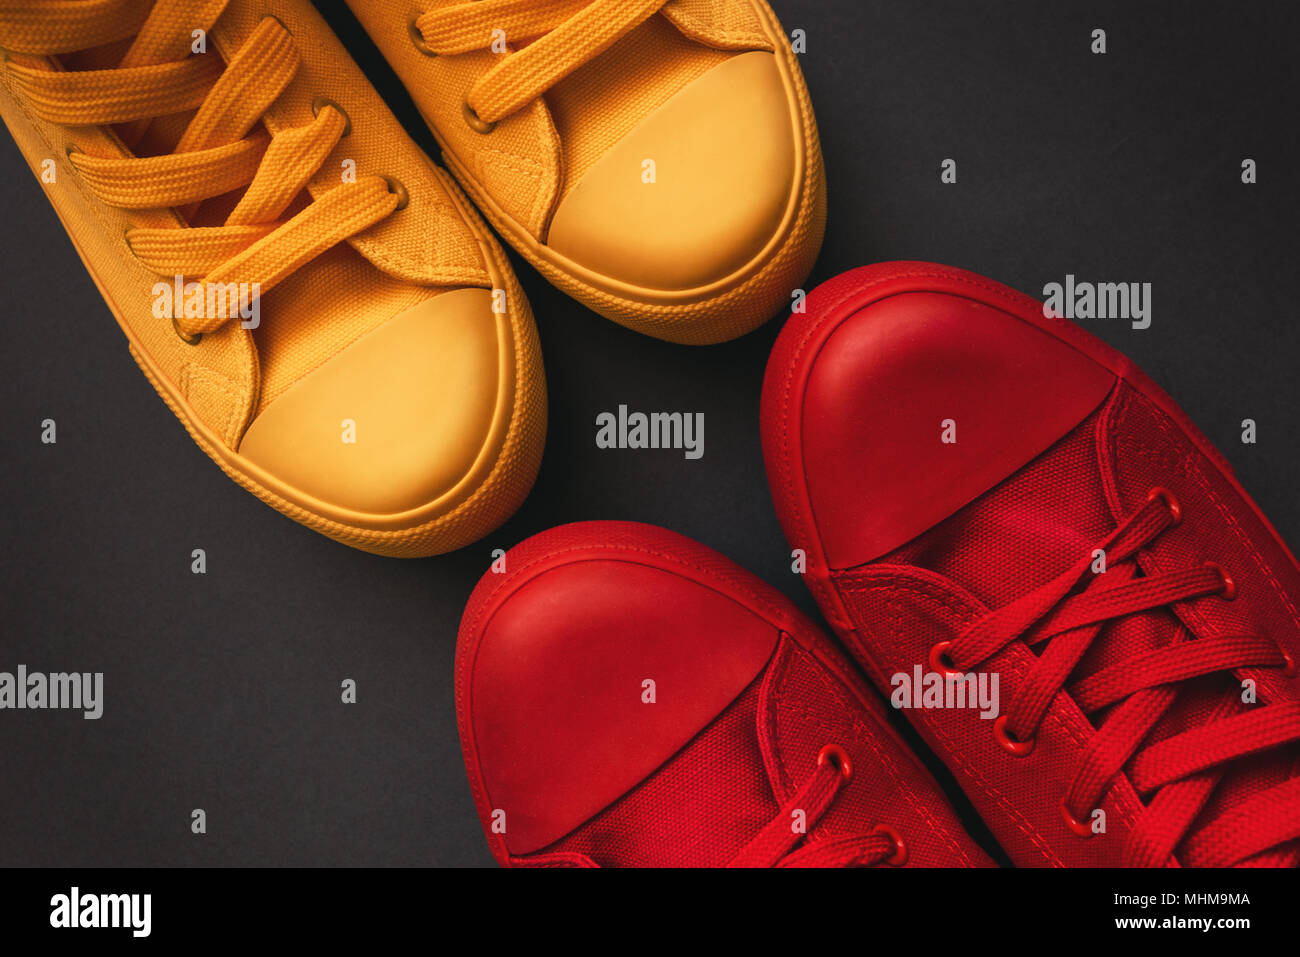 Young adult people on a love date, conceptual image. Top view of two pair of casual sneakers, yellow and red, from above close to each other Stock Photo